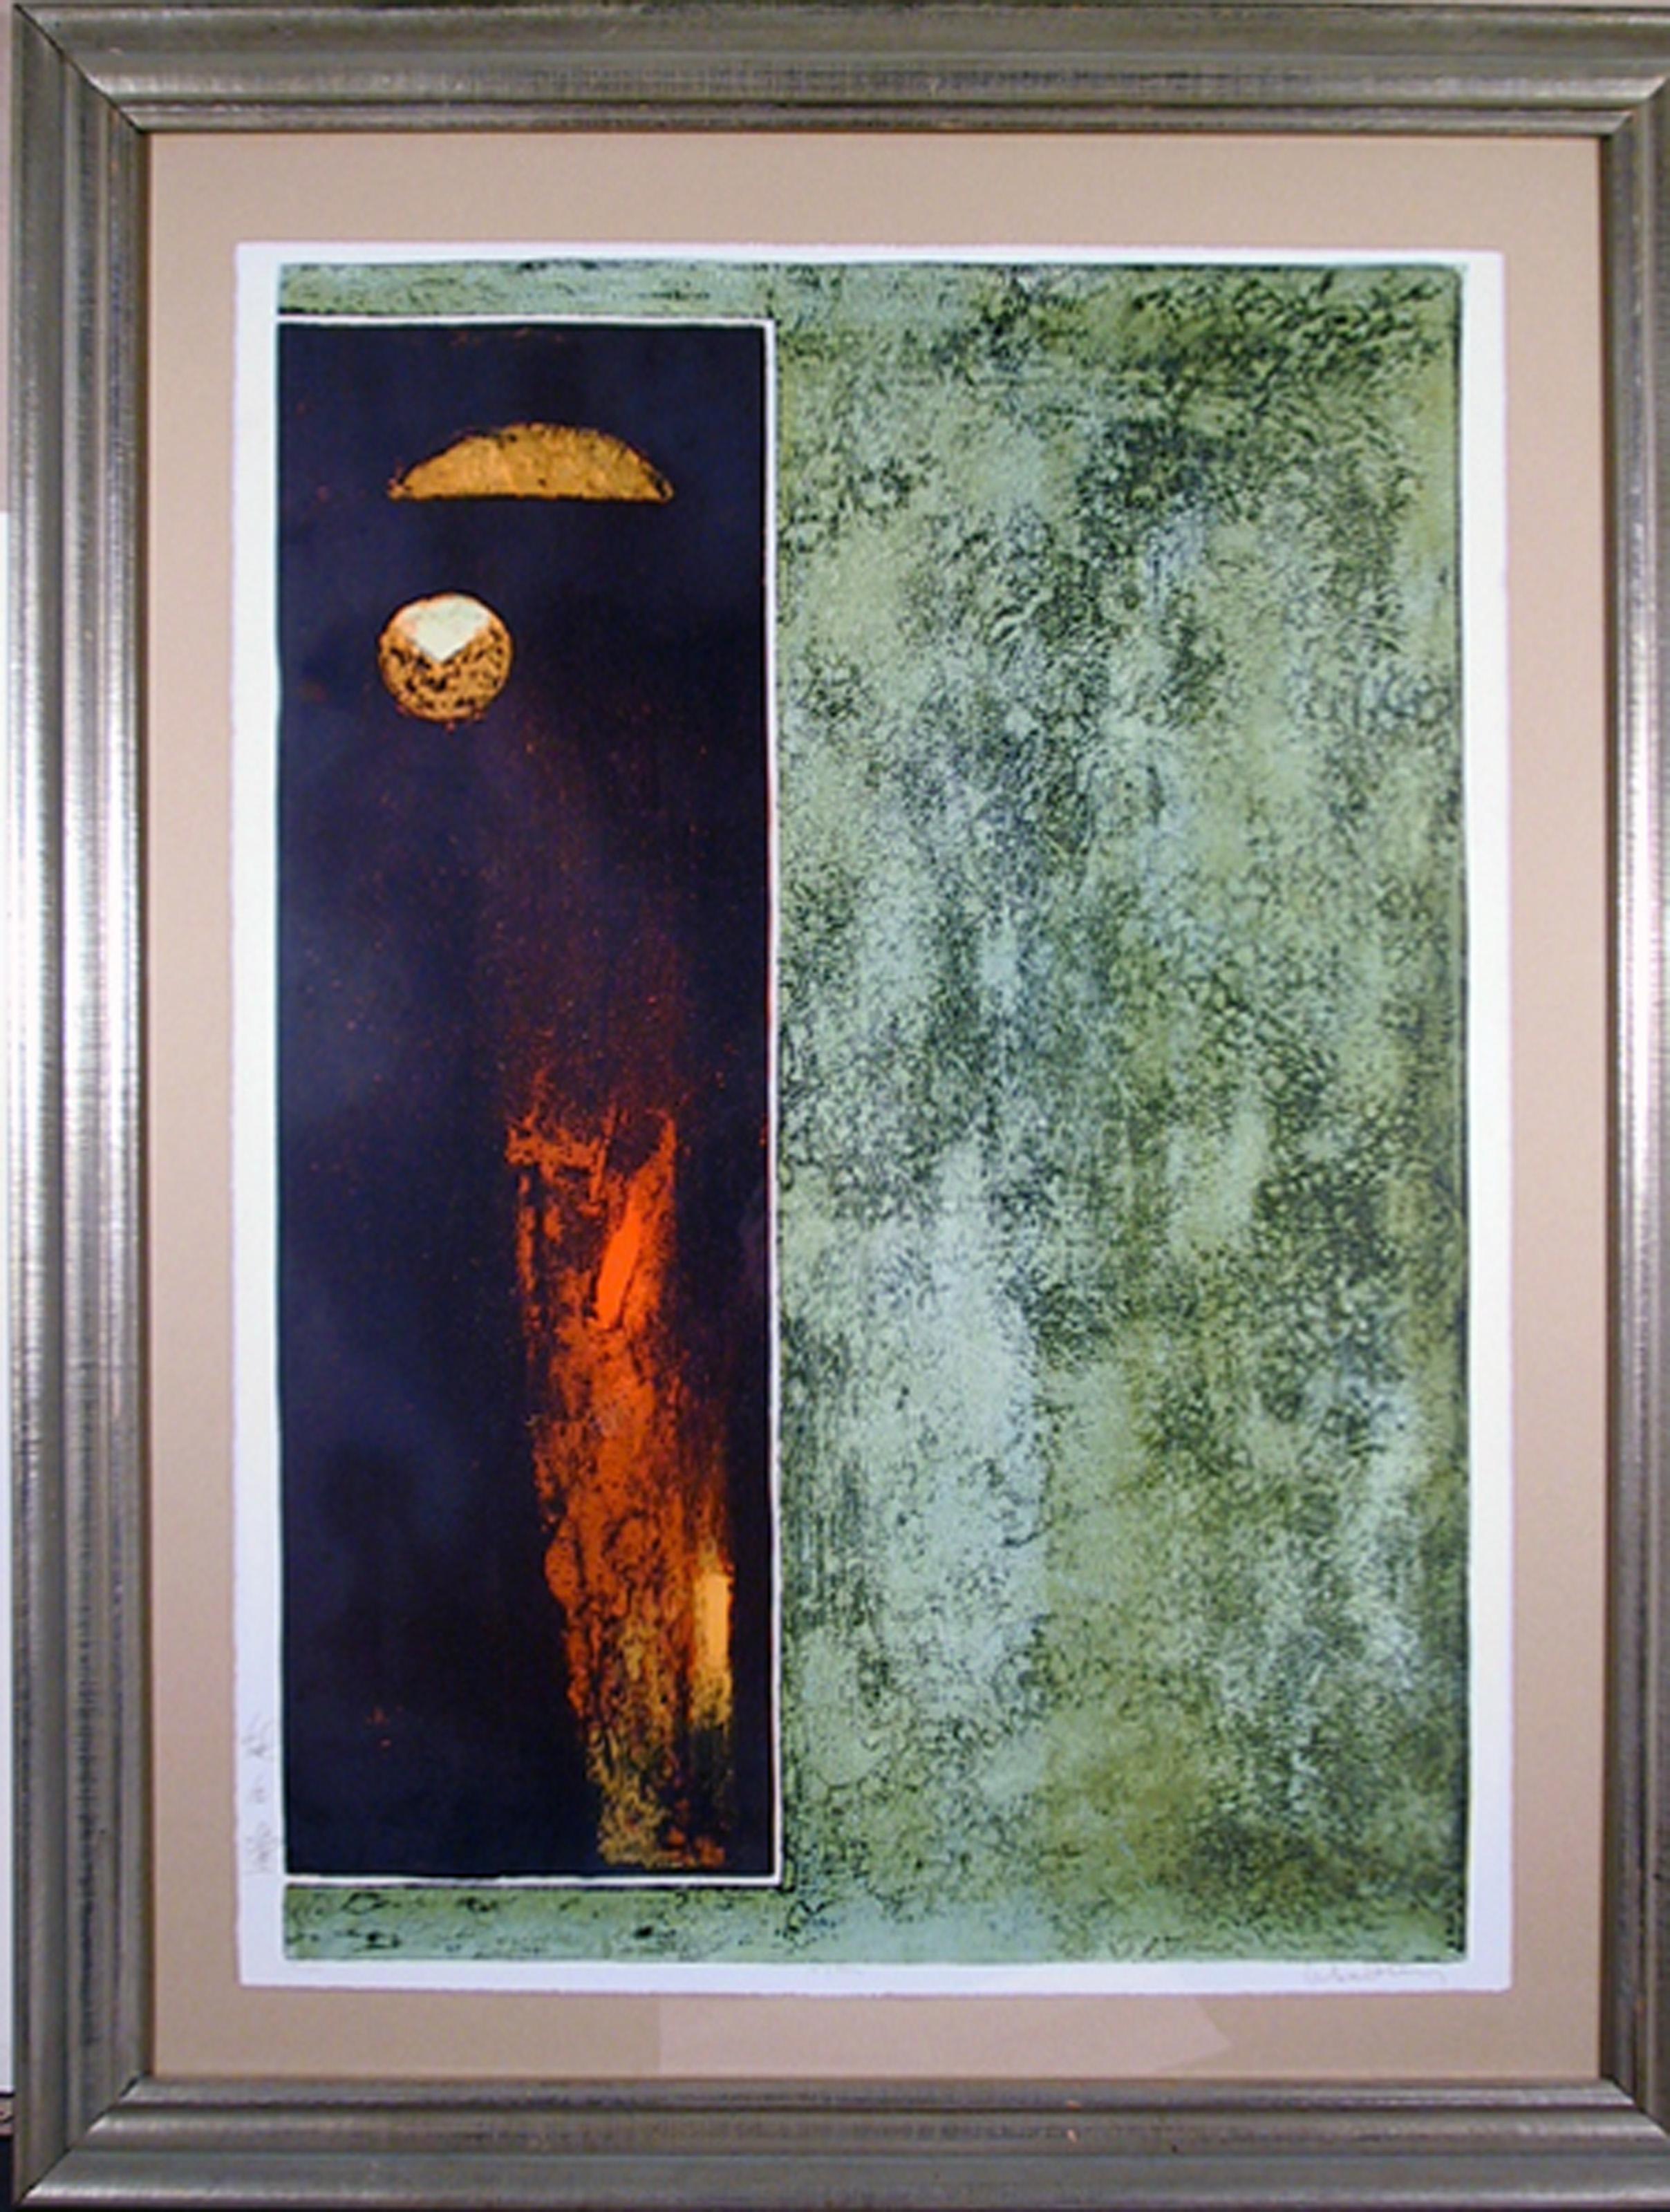 Lebadang (aka Hoi), Vietnamese (1922 - 2015) -  In Space. Year: Circa 1970, Medium: Lithograph, signed and numbered in pencil, Edition: 49/150, Size: 38 x 29 in. (96.52 x 73.66 cm), Frame Size: 39 x 30 inches 